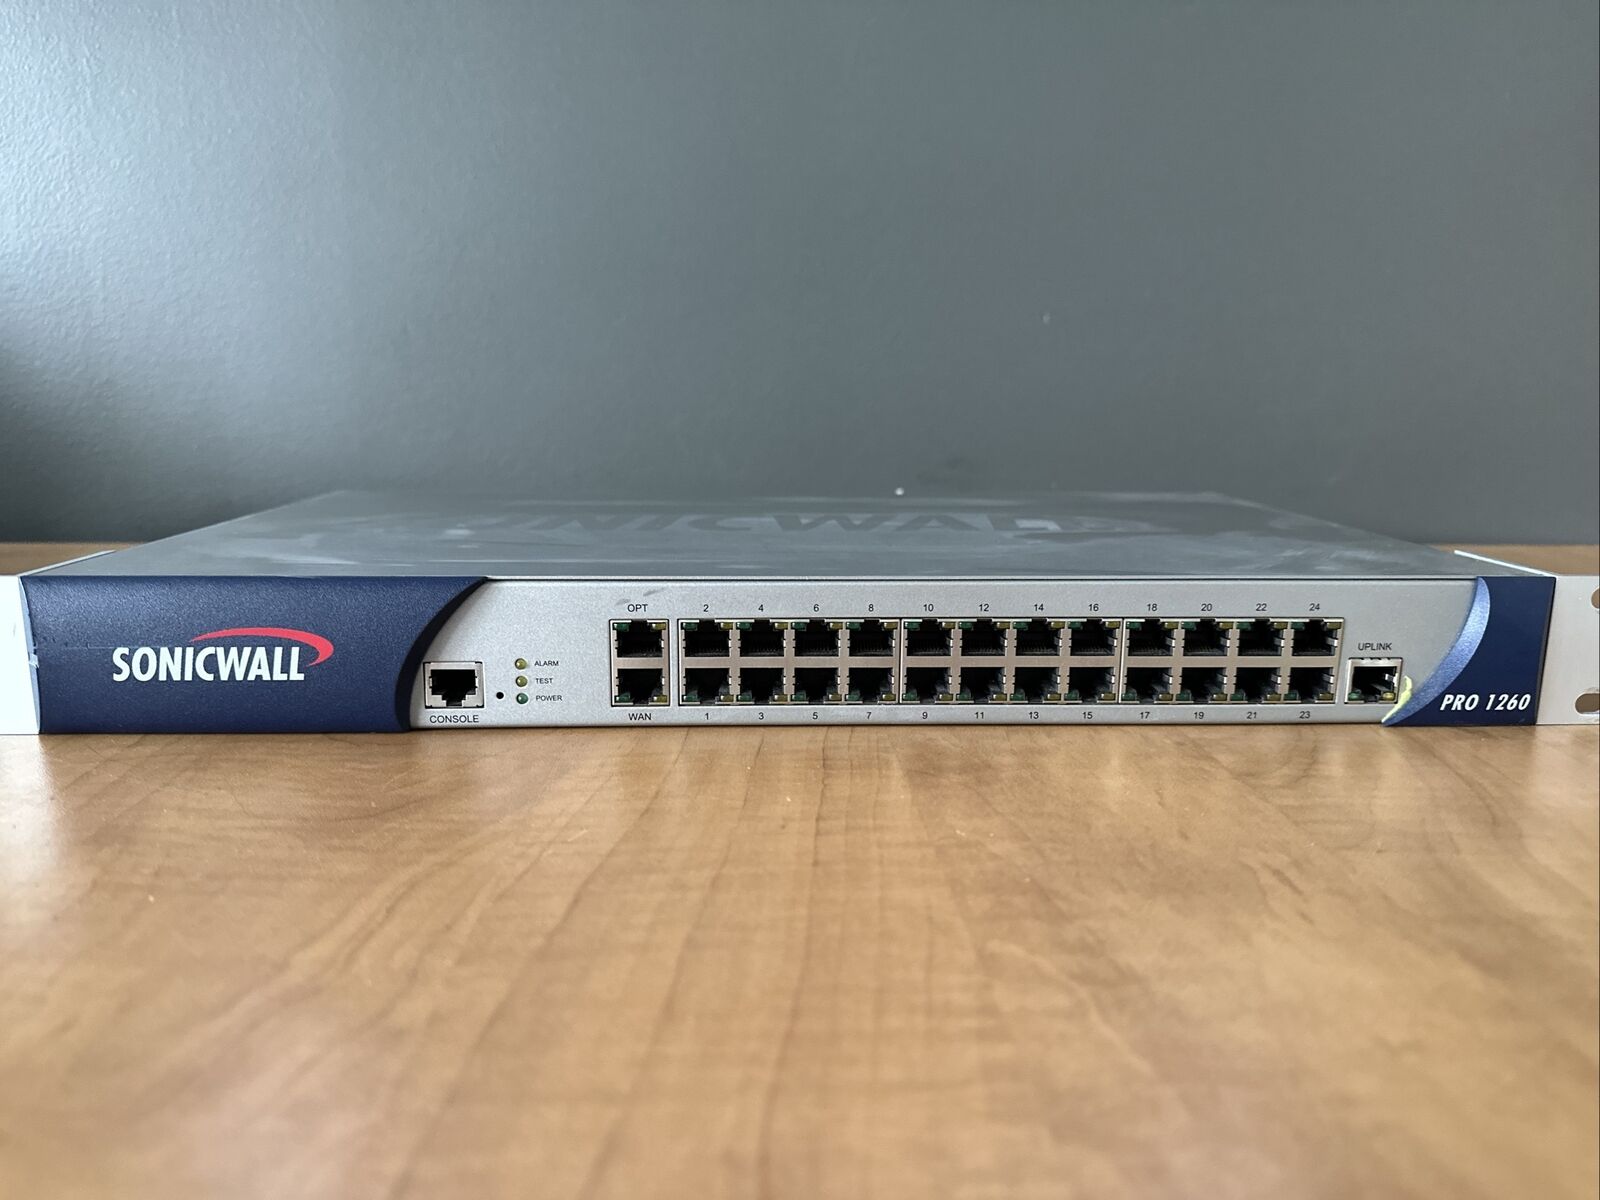 SonicWall Pro 3060 1RK09-032 Firewall VPN Network Security Appliance - UNTESTED